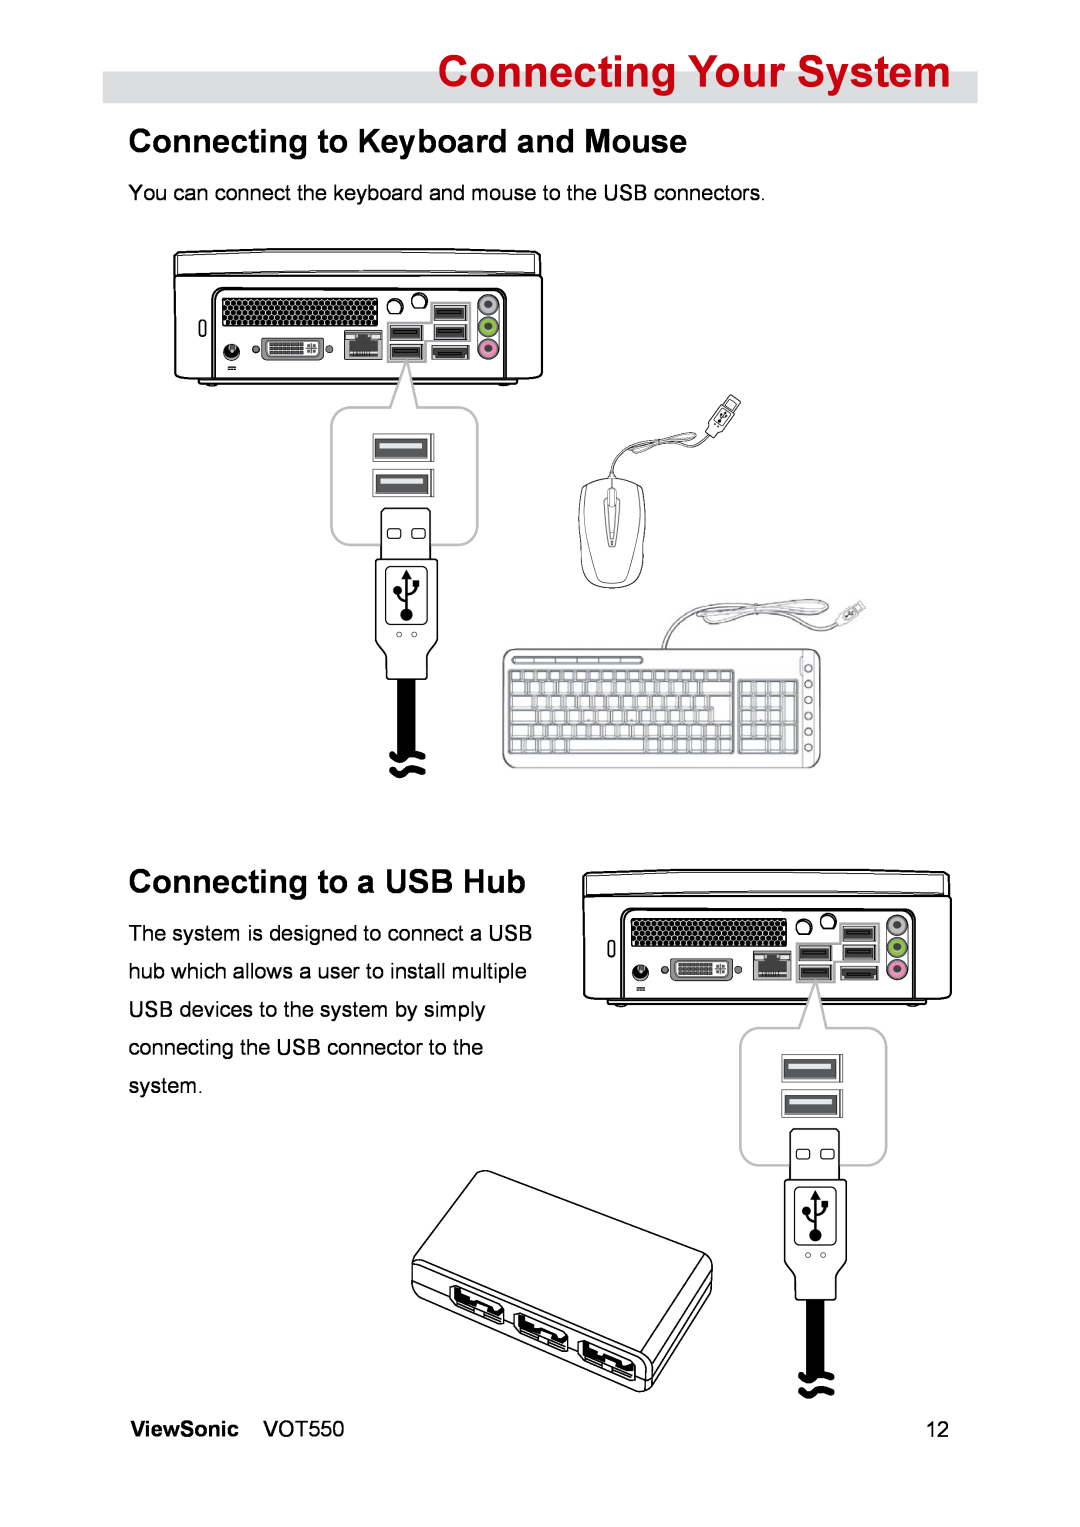 ViewSonic manual Connecting to Keyboard and Mouse, Connecting to a USB Hub, Connecting Your System, ViewSonic VOT550 